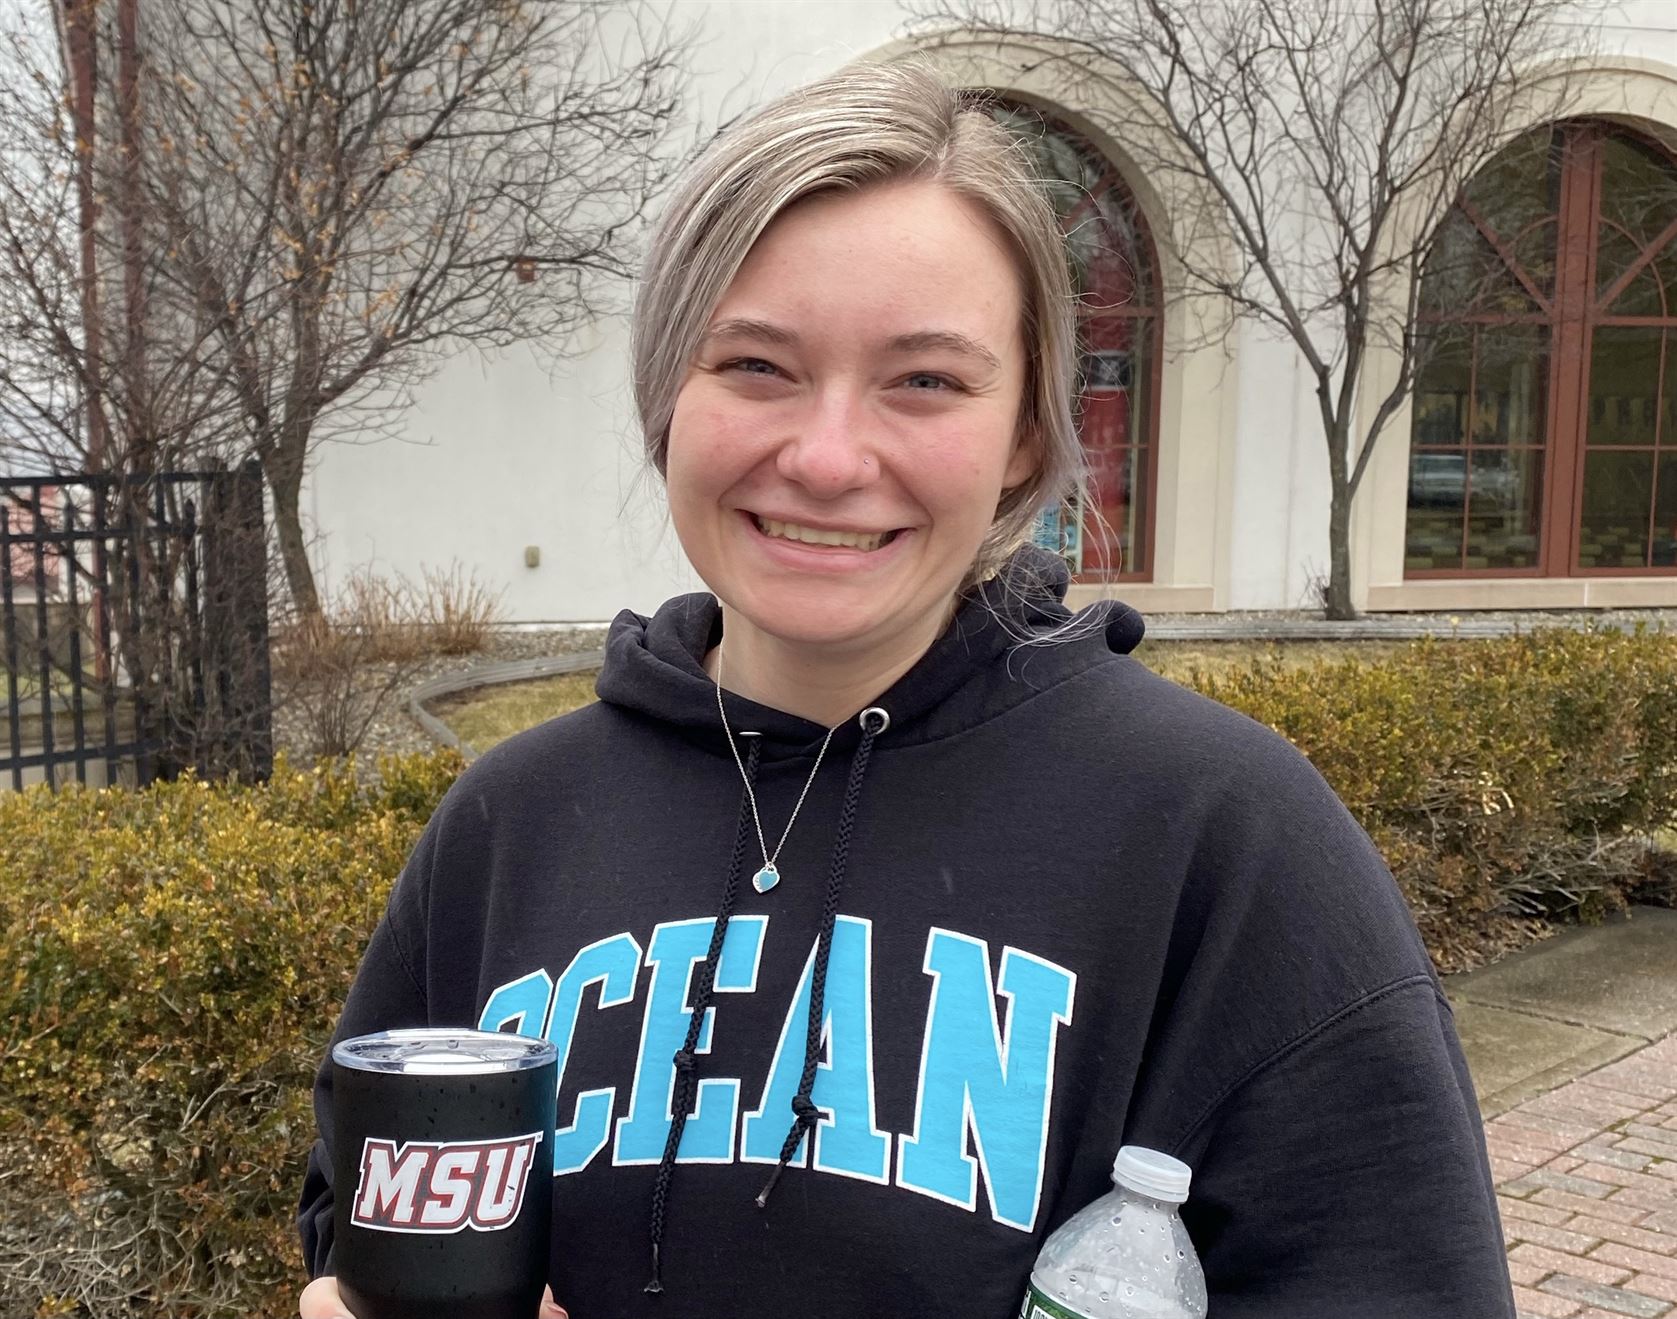 Sam Seiser, a junior majoring in educational foundations for elementary teachers, said she understands the school is trying to keep students safe. Erin Lawlor | The Montclarion